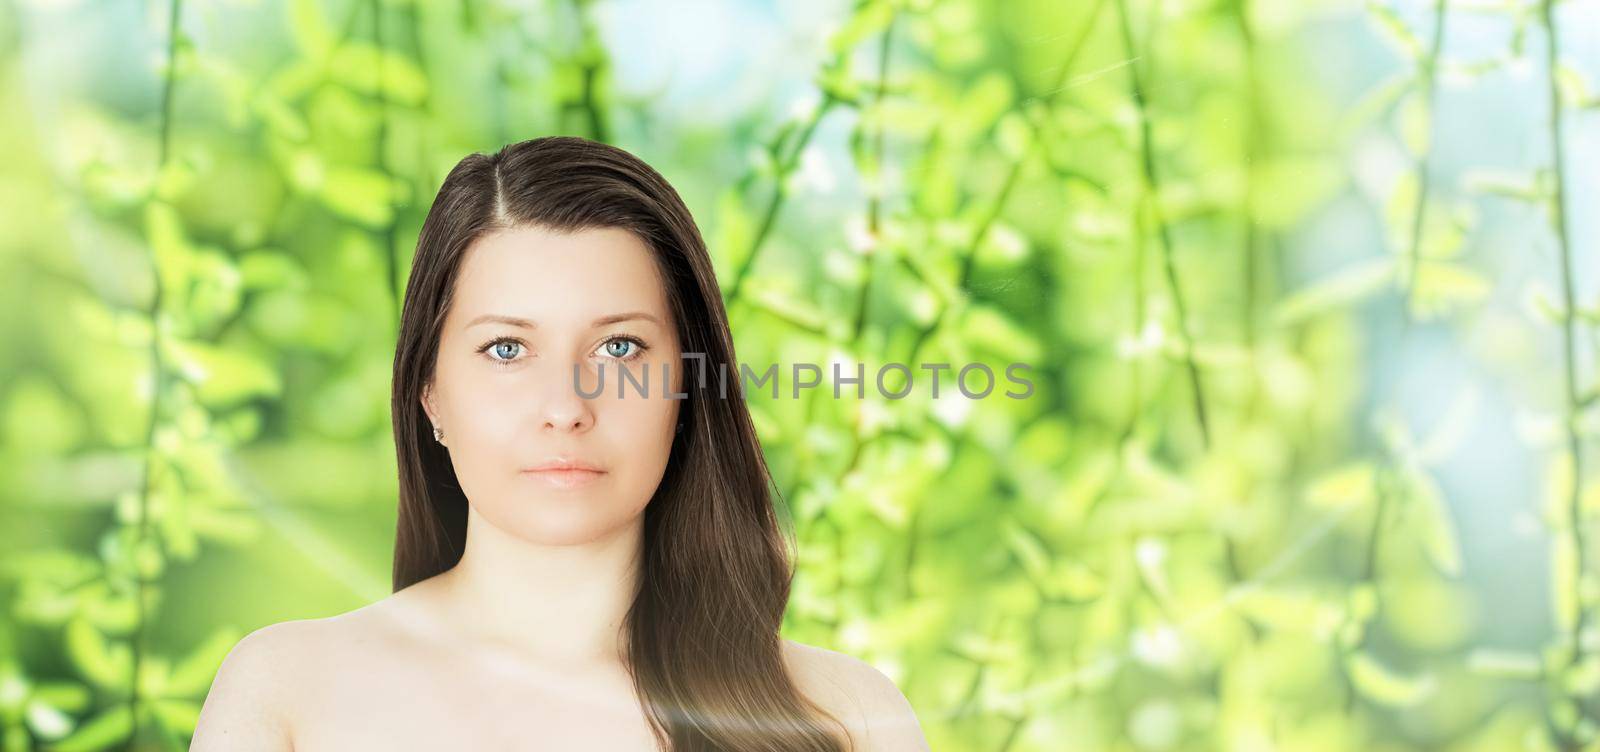 Beauty portrait of young woman for natural skincare and cosmetic brand, spring nature on background as wellness, health and organic beauty concept by Anneleven